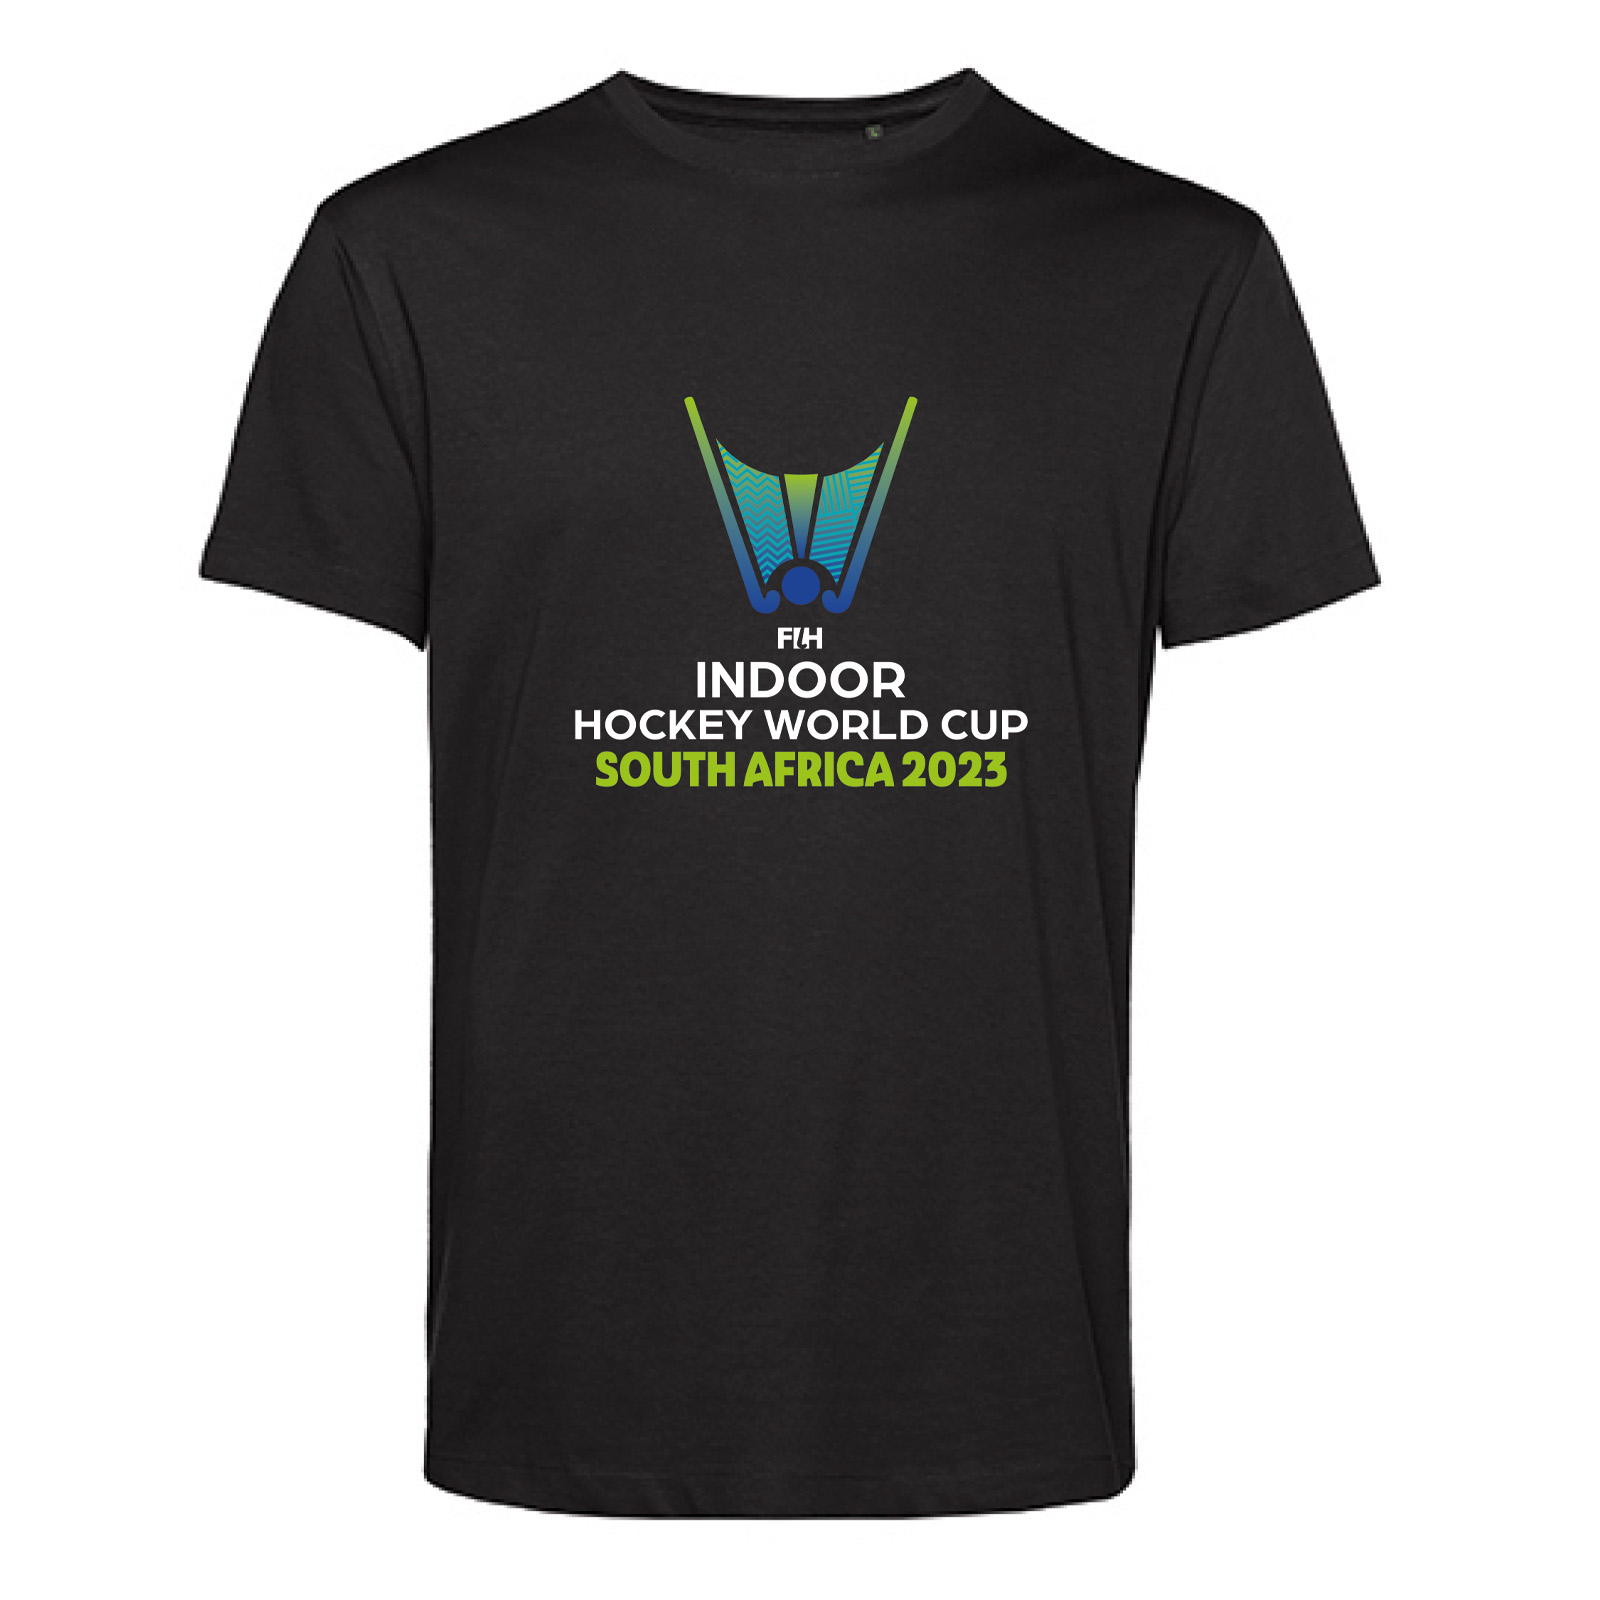 T-shirt, Black - Indoor Hockey World Cup South Africa 2023 